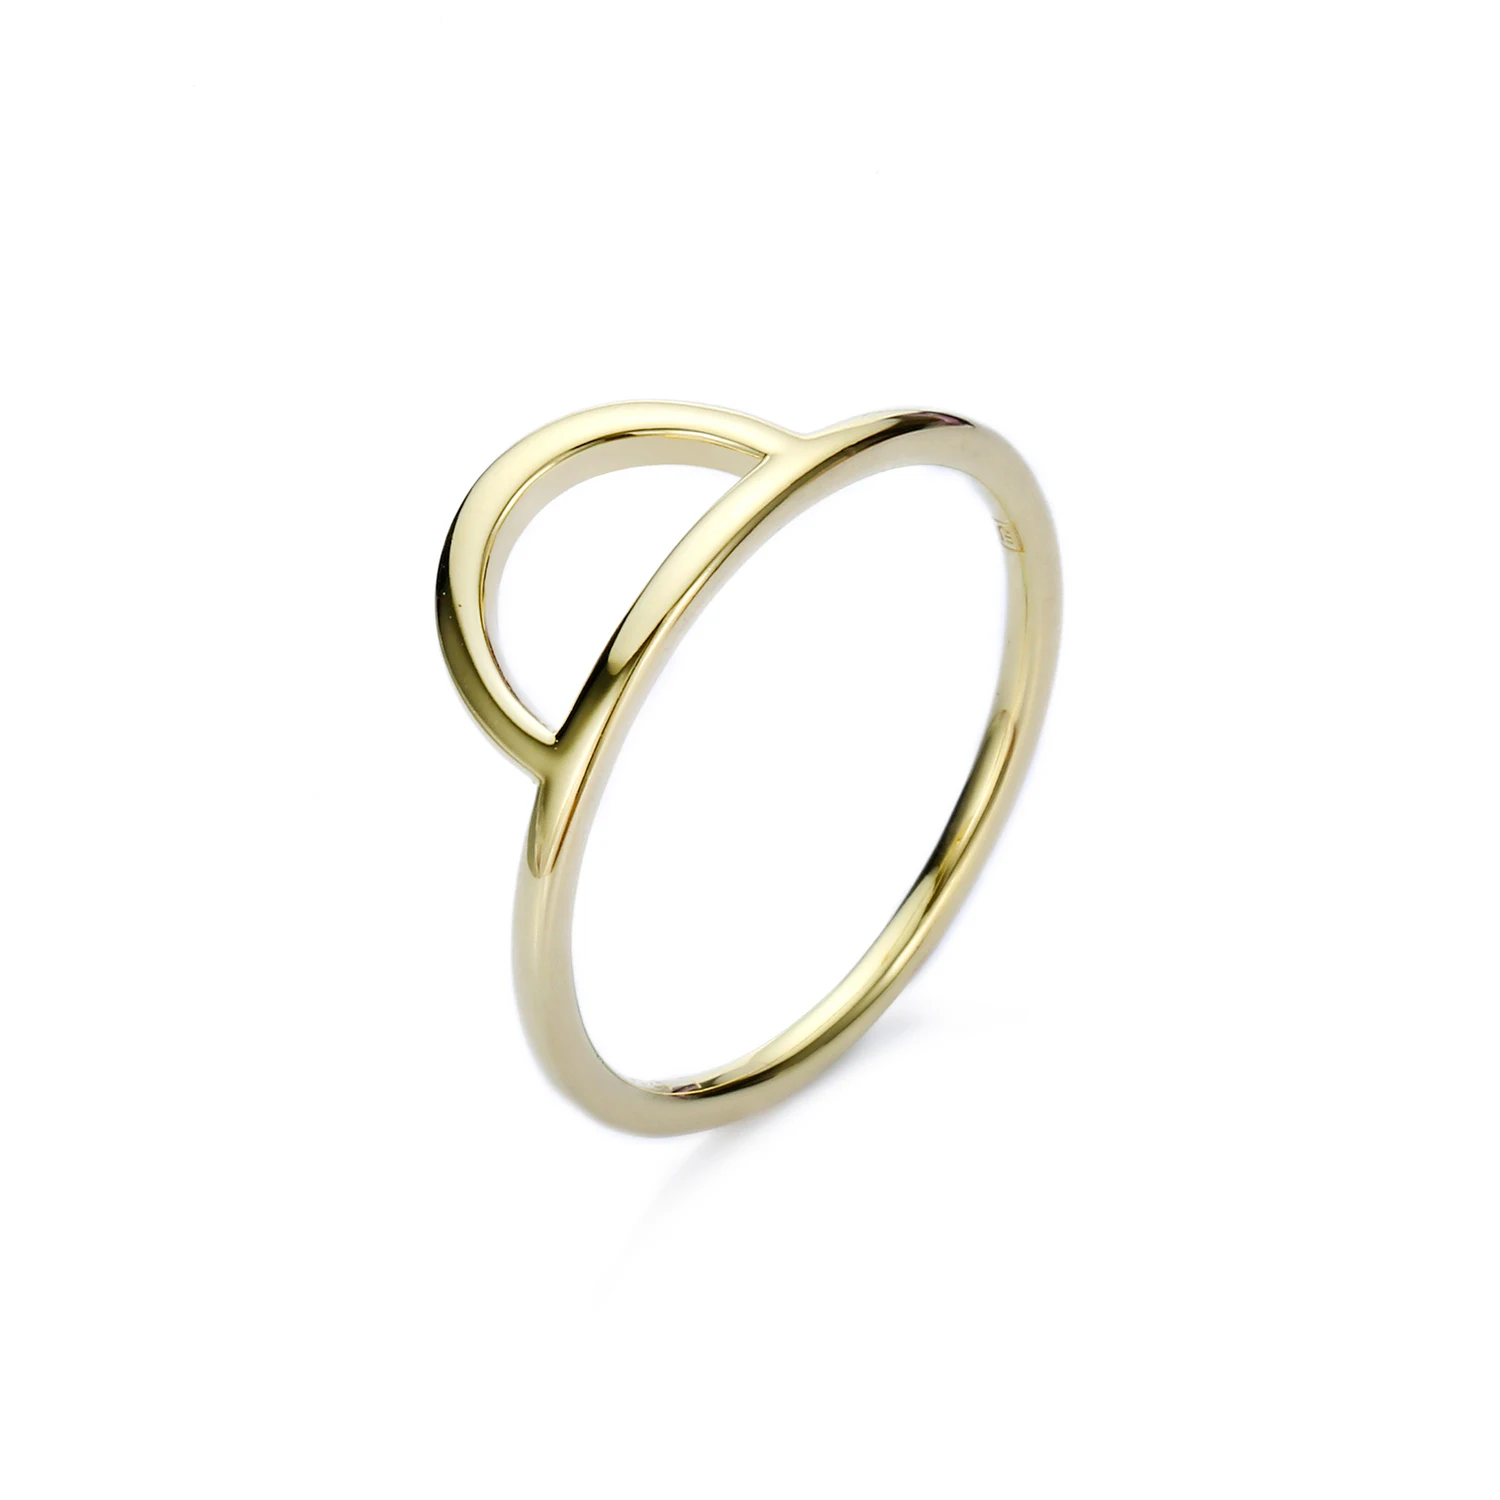 

Top Quality Minimalist Jewelry Titanium 316L Stainless Steel 14k Gold PVD Plated Semi-Circular Ring for Women